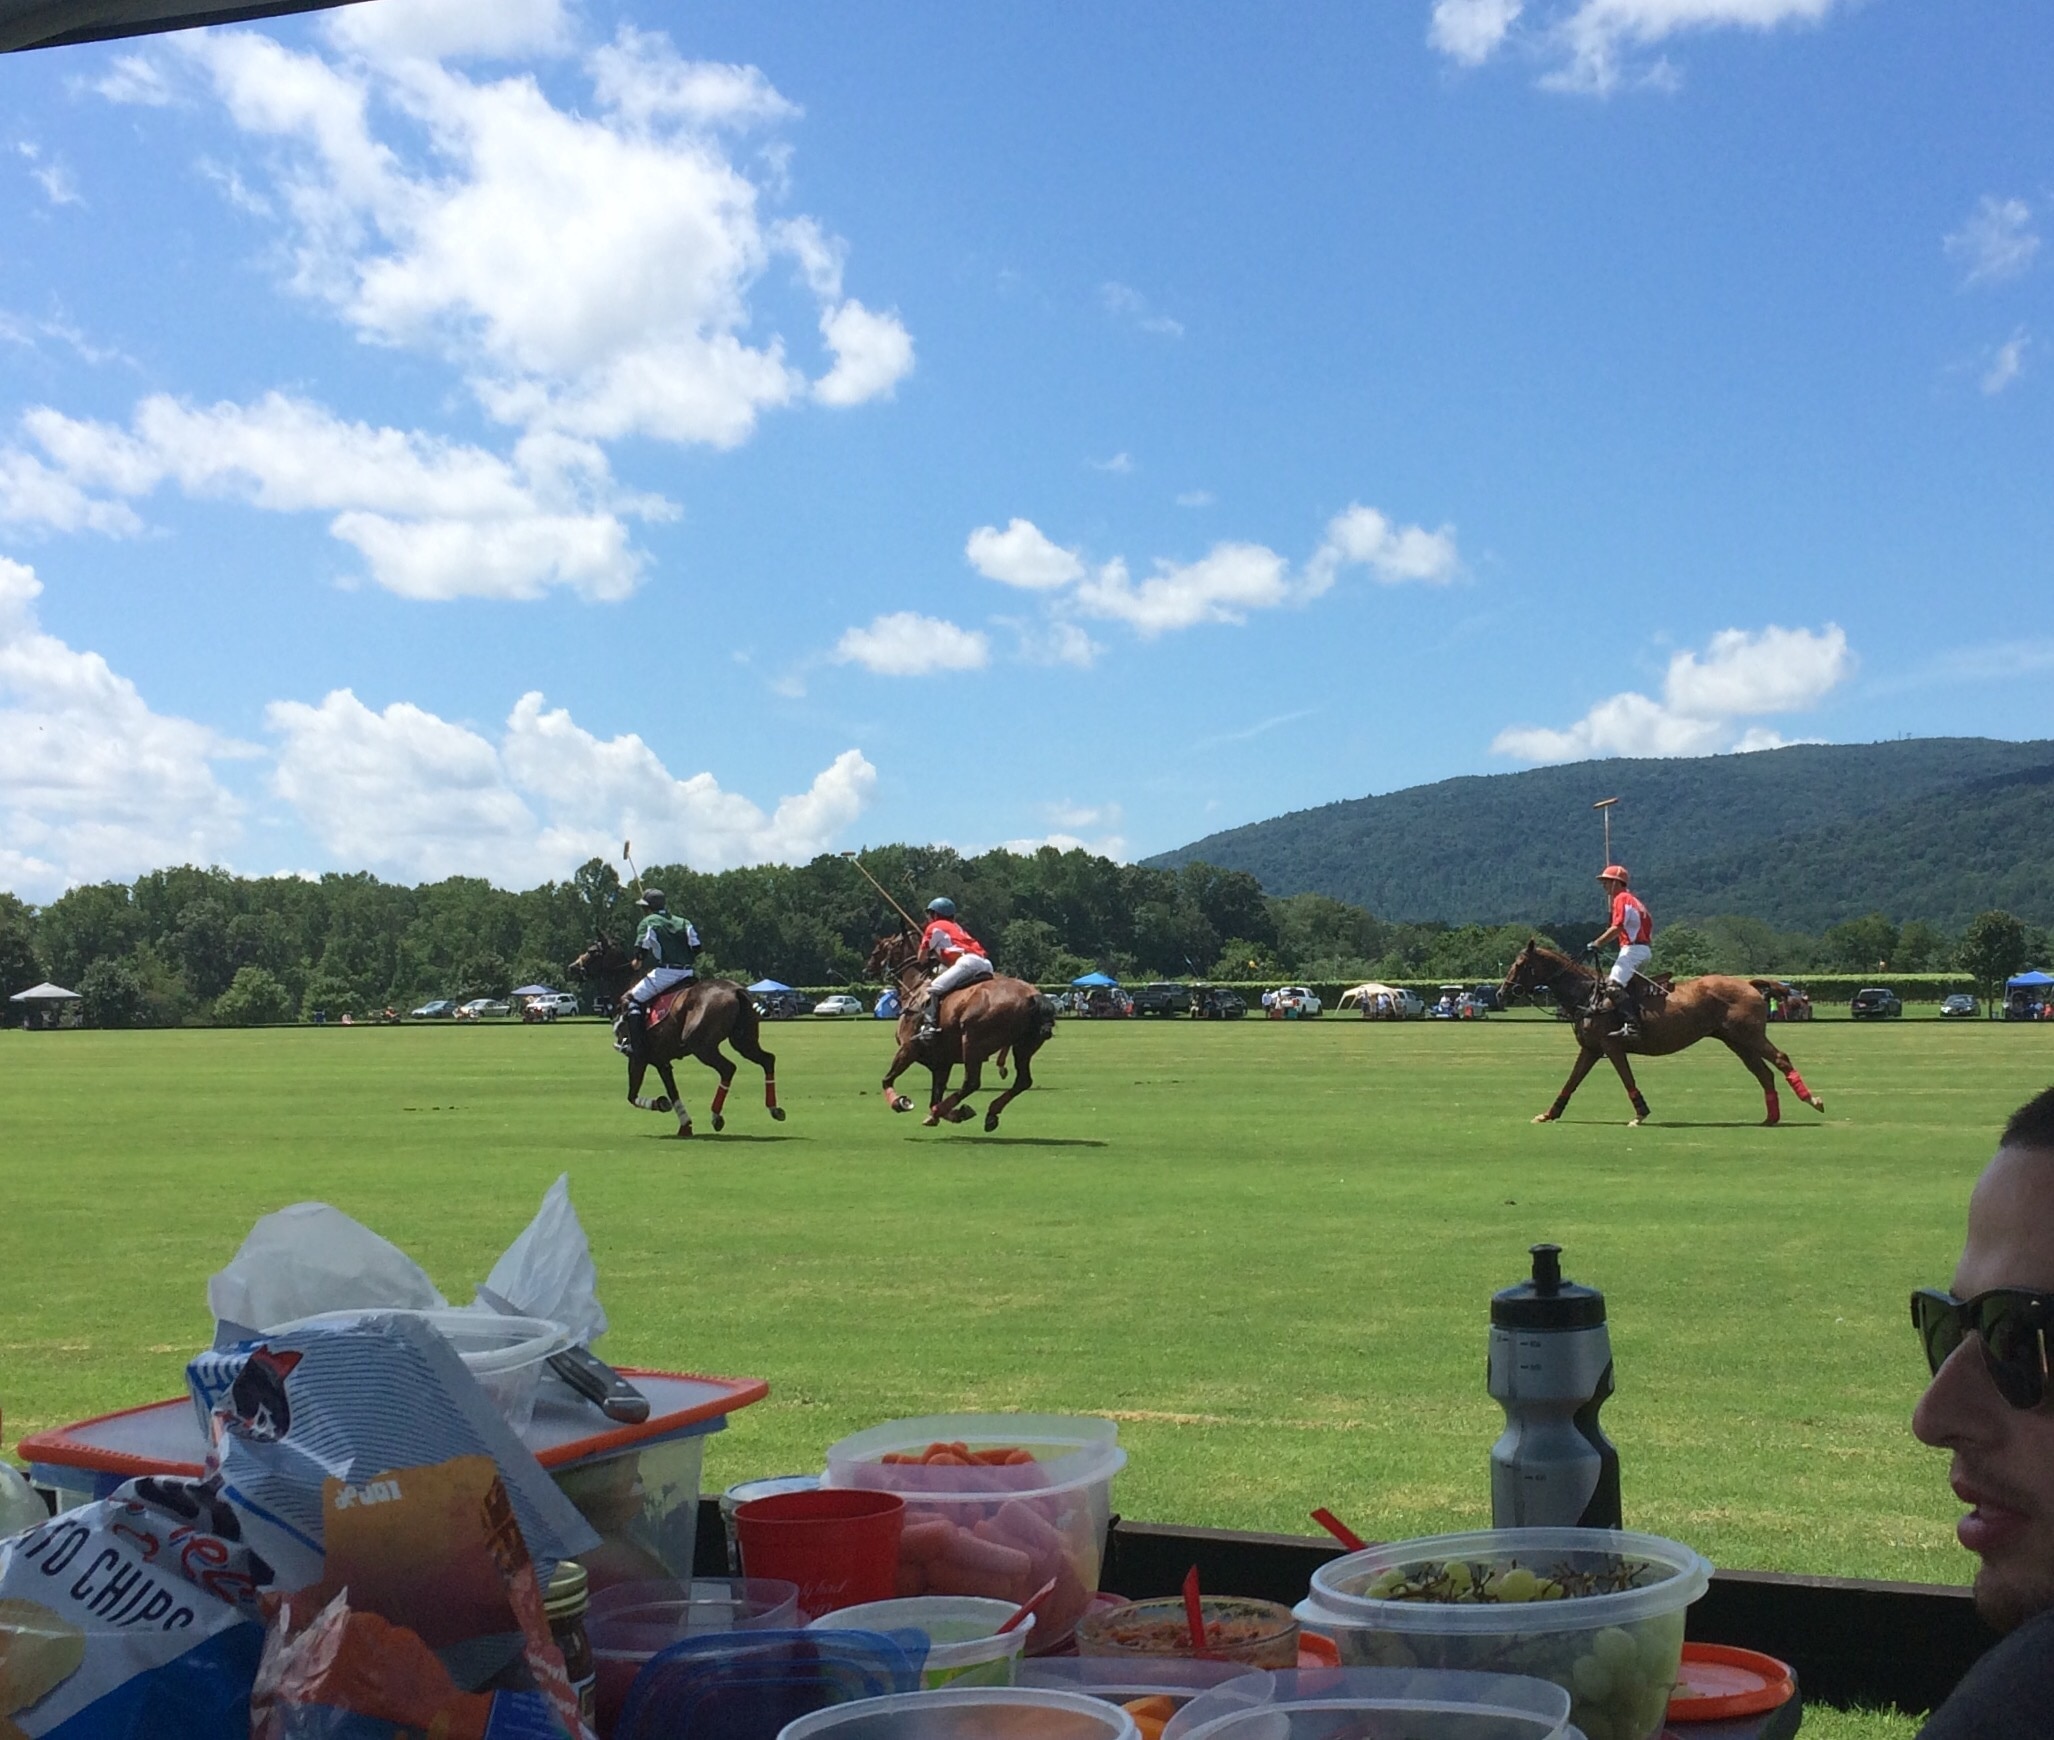 One of the Charlottesville area vineyards has free polo matches every Sunday in the summer. Everyone brings food, a tent, buys some wine and enjoys the match! #EndlessSummer